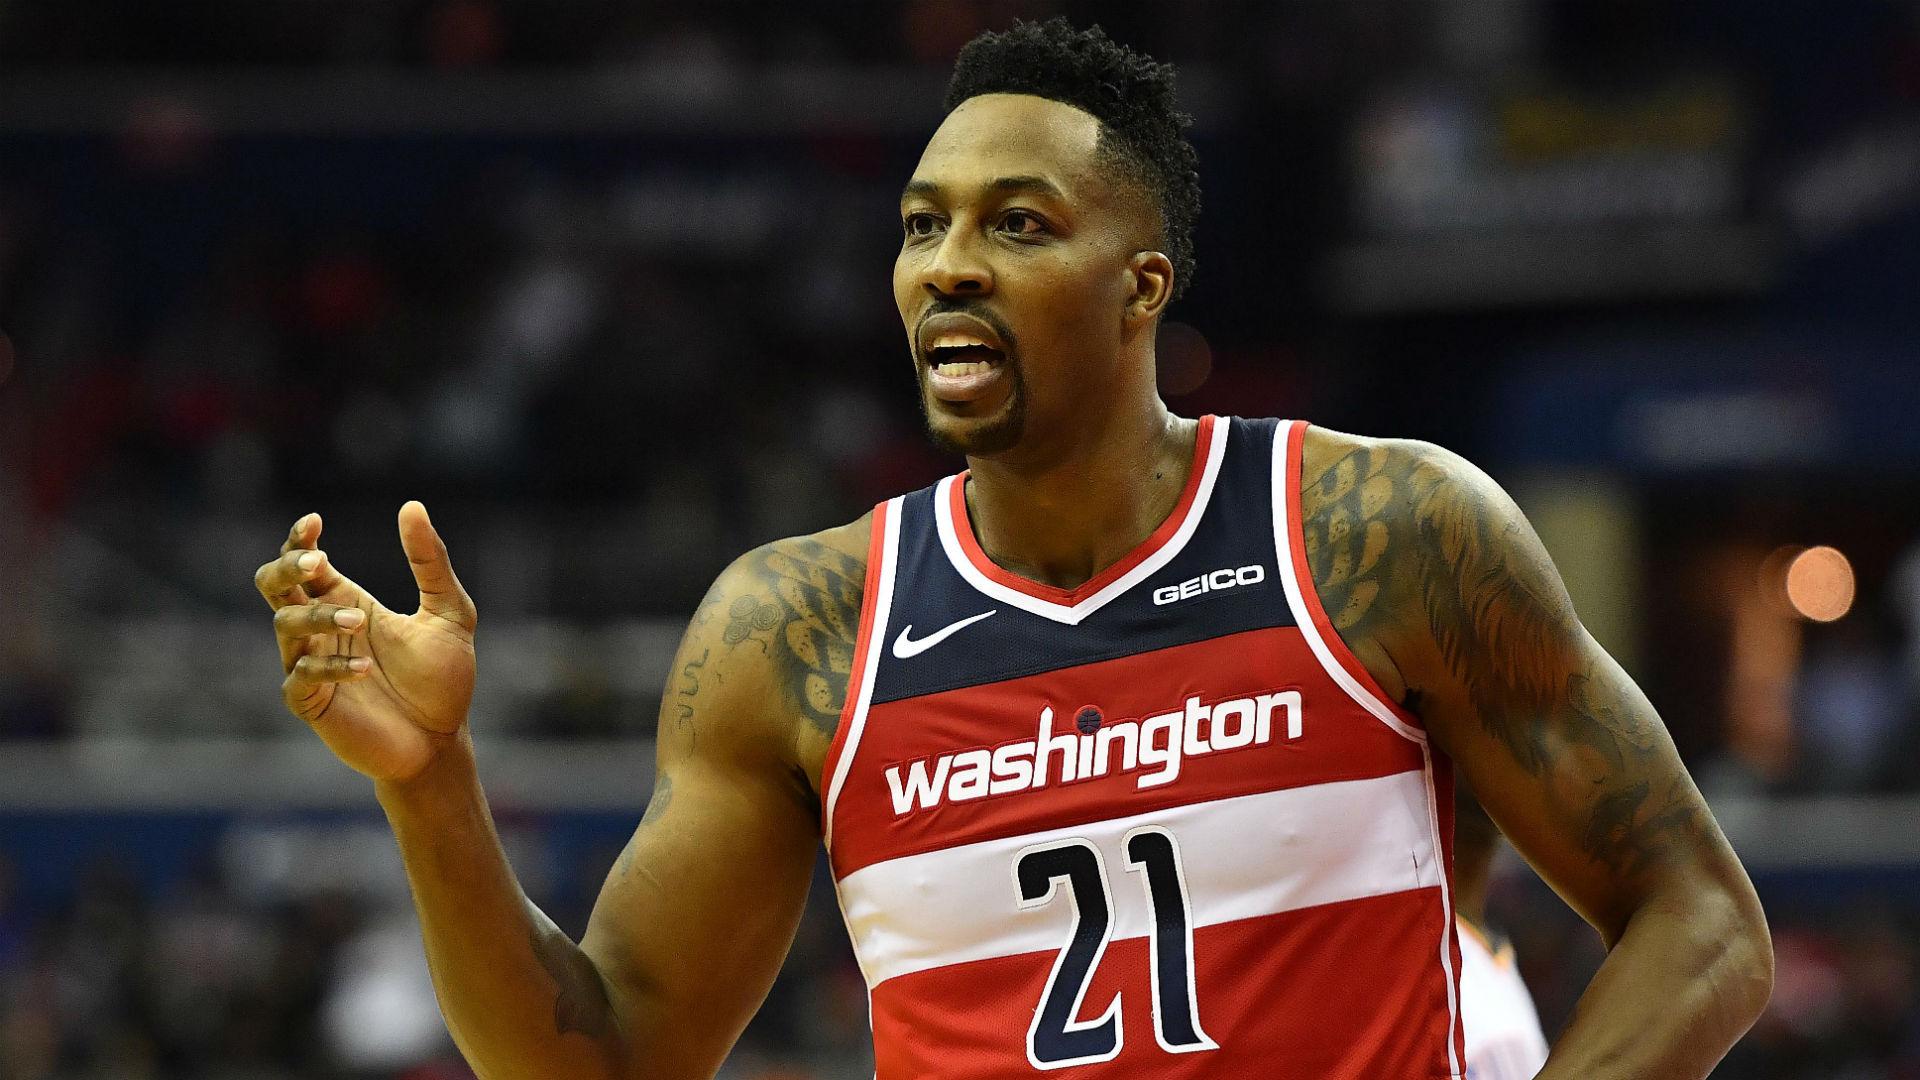 Dwight Howard impresses in first start, but can't get Wizards out